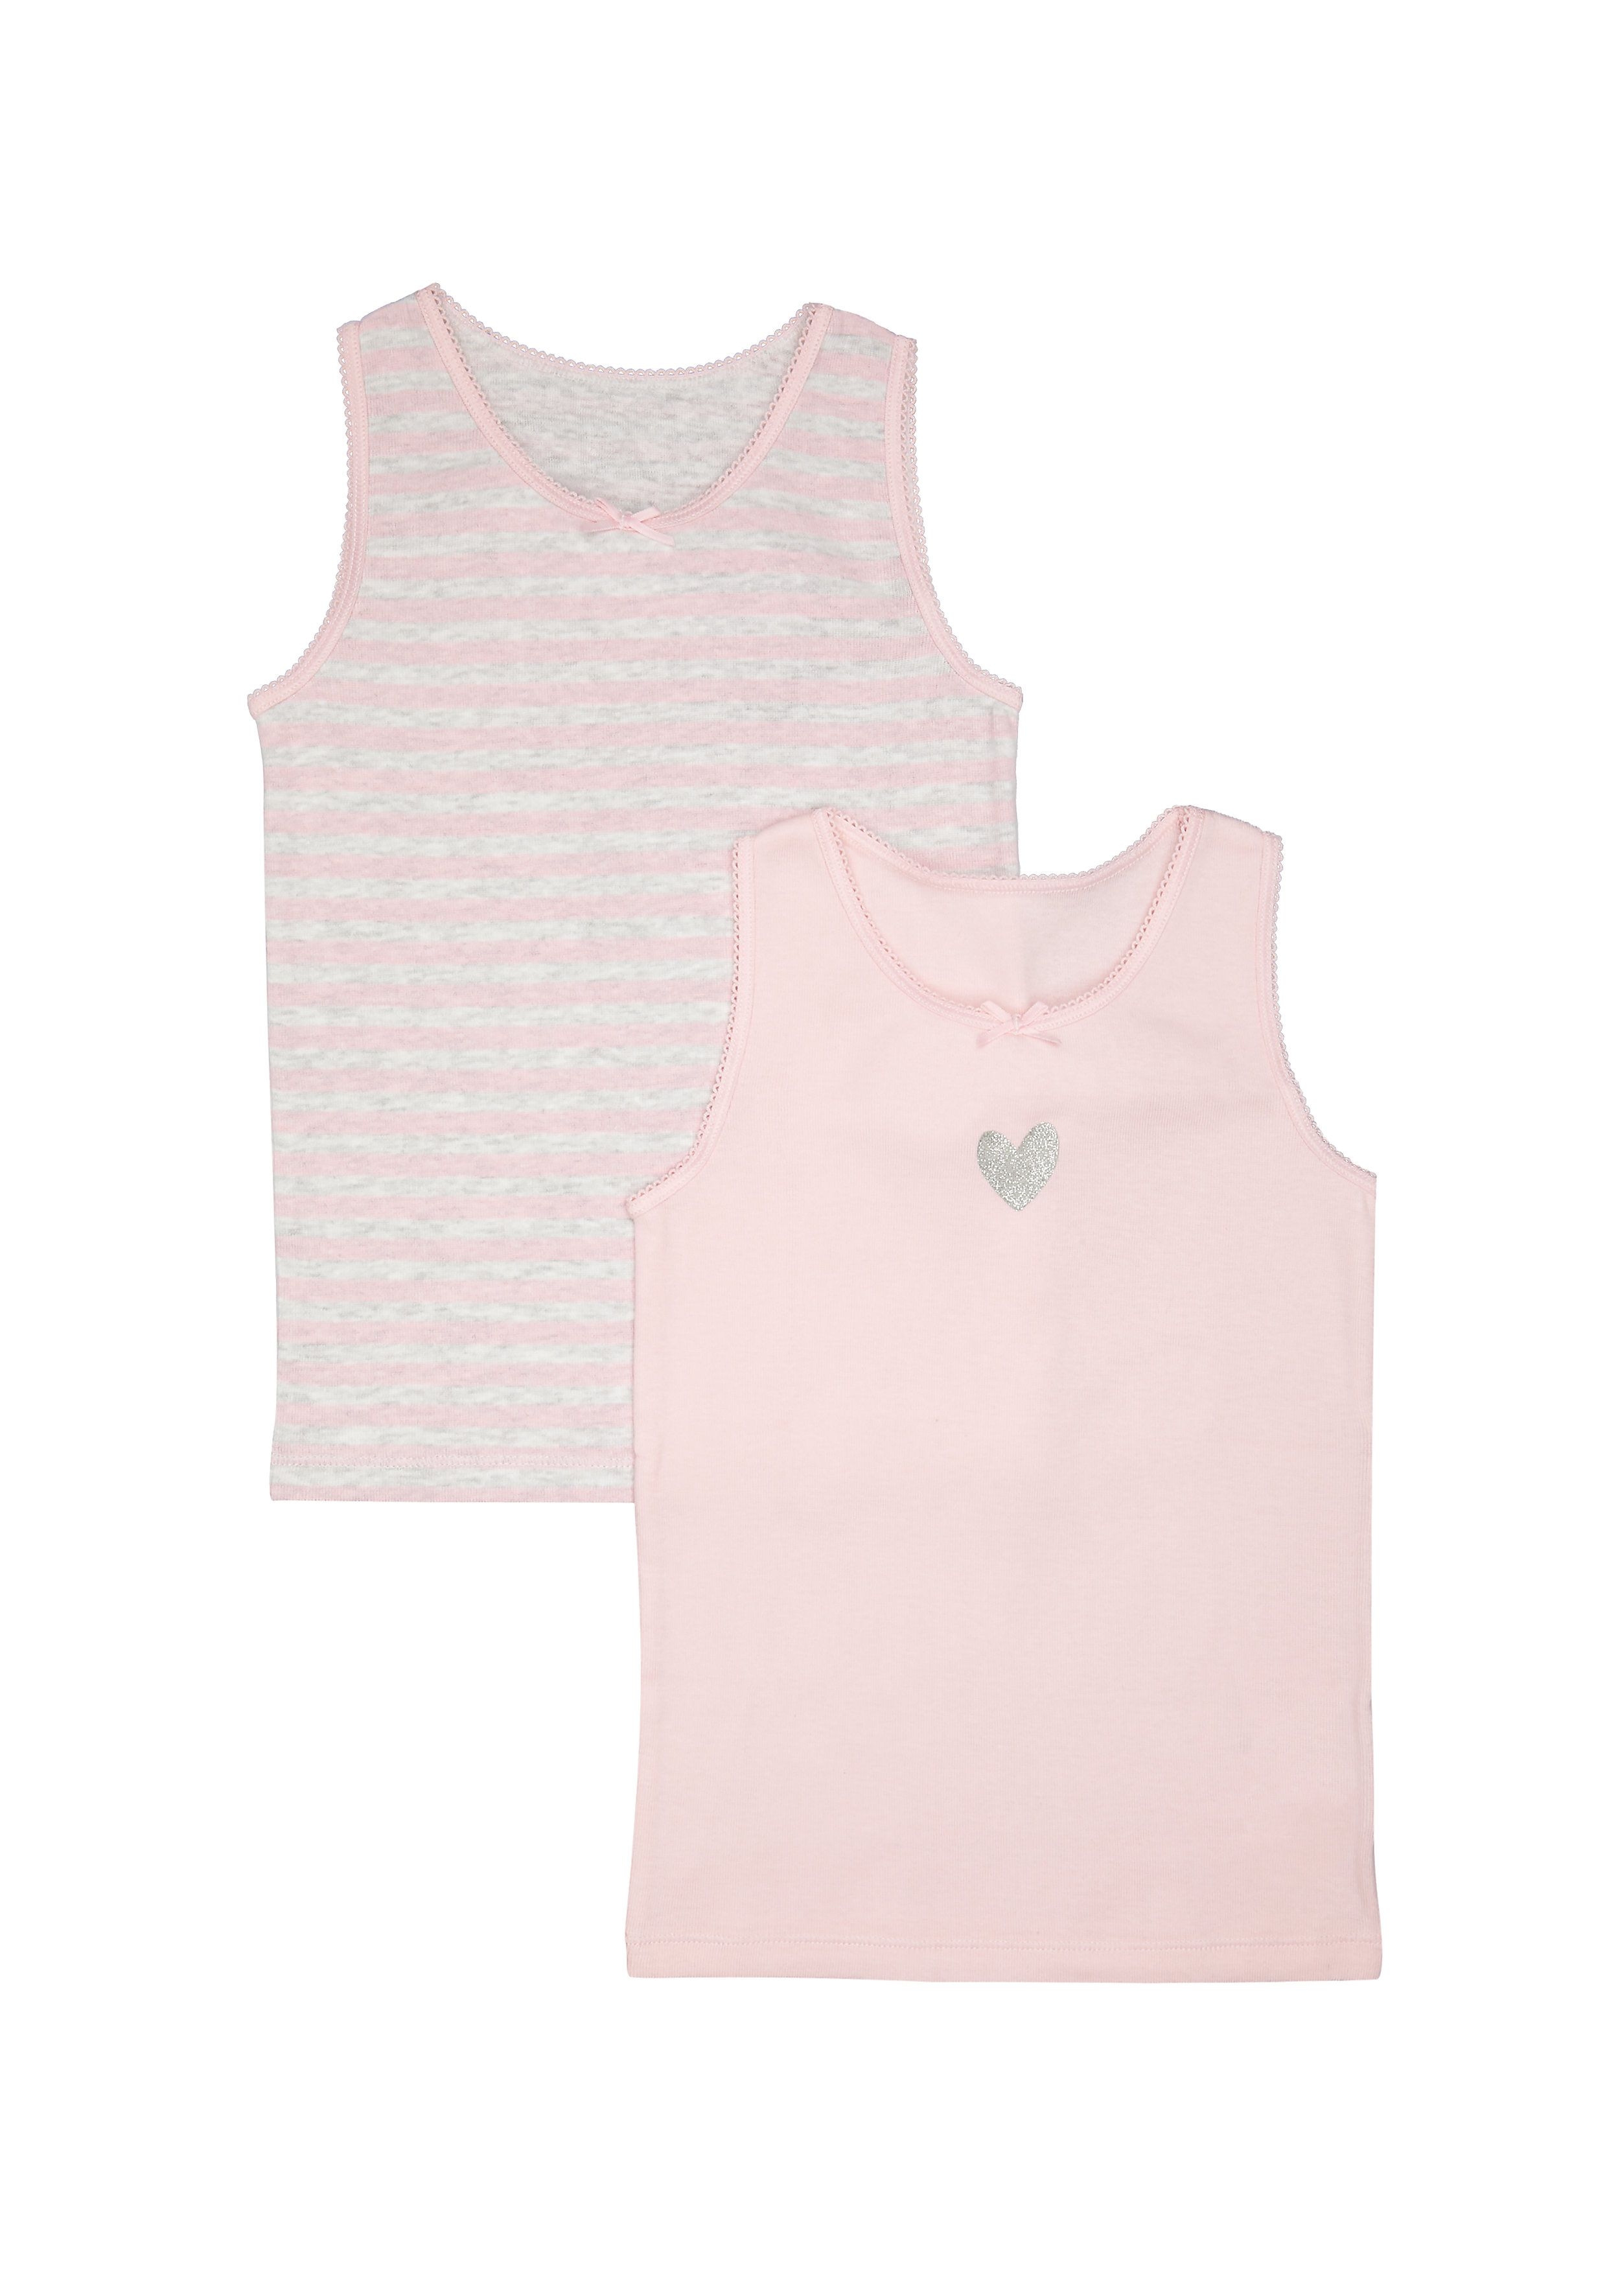 Mothercare | Girls Heart And Stripe Vests - 2 Pack - Pink 0